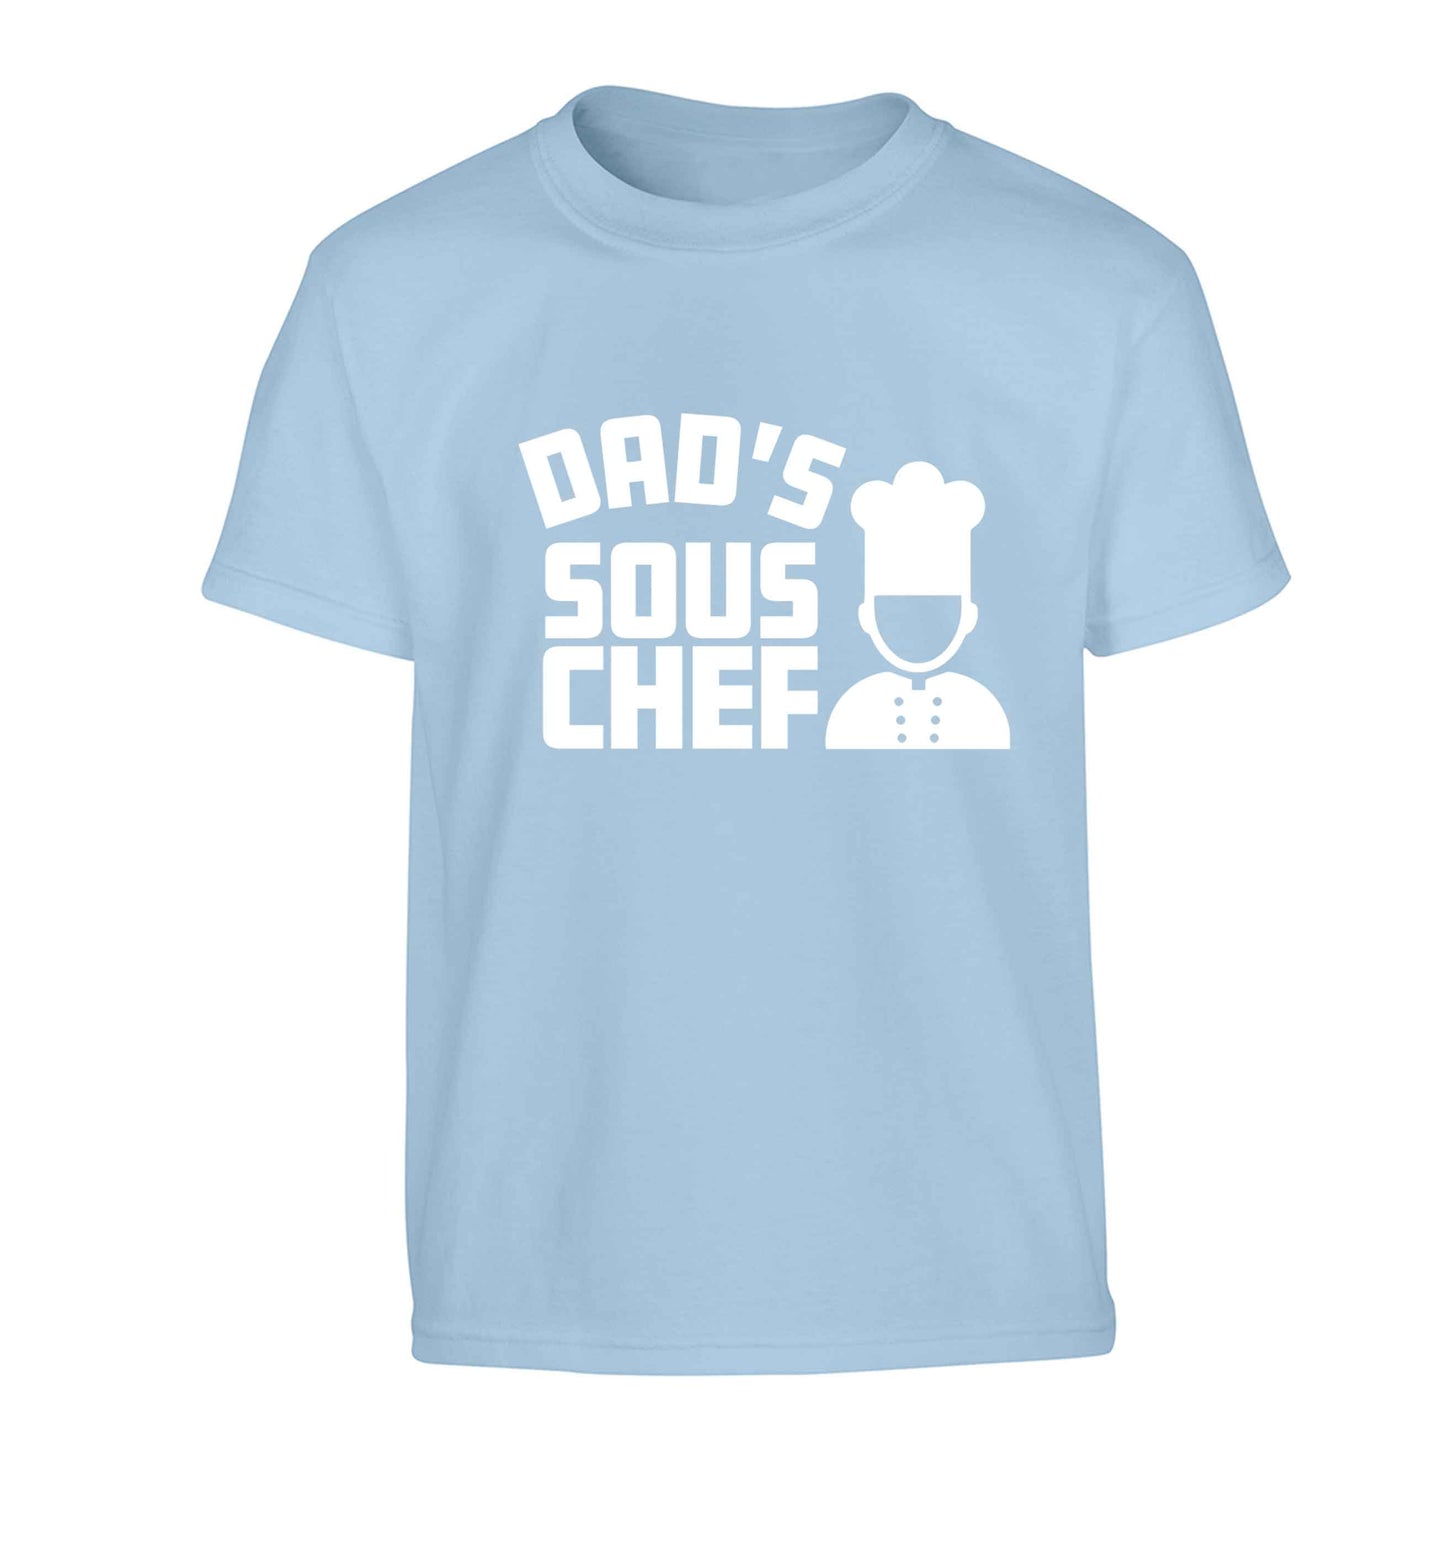 Dad's sous chef Children's light blue Tshirt 12-13 Years